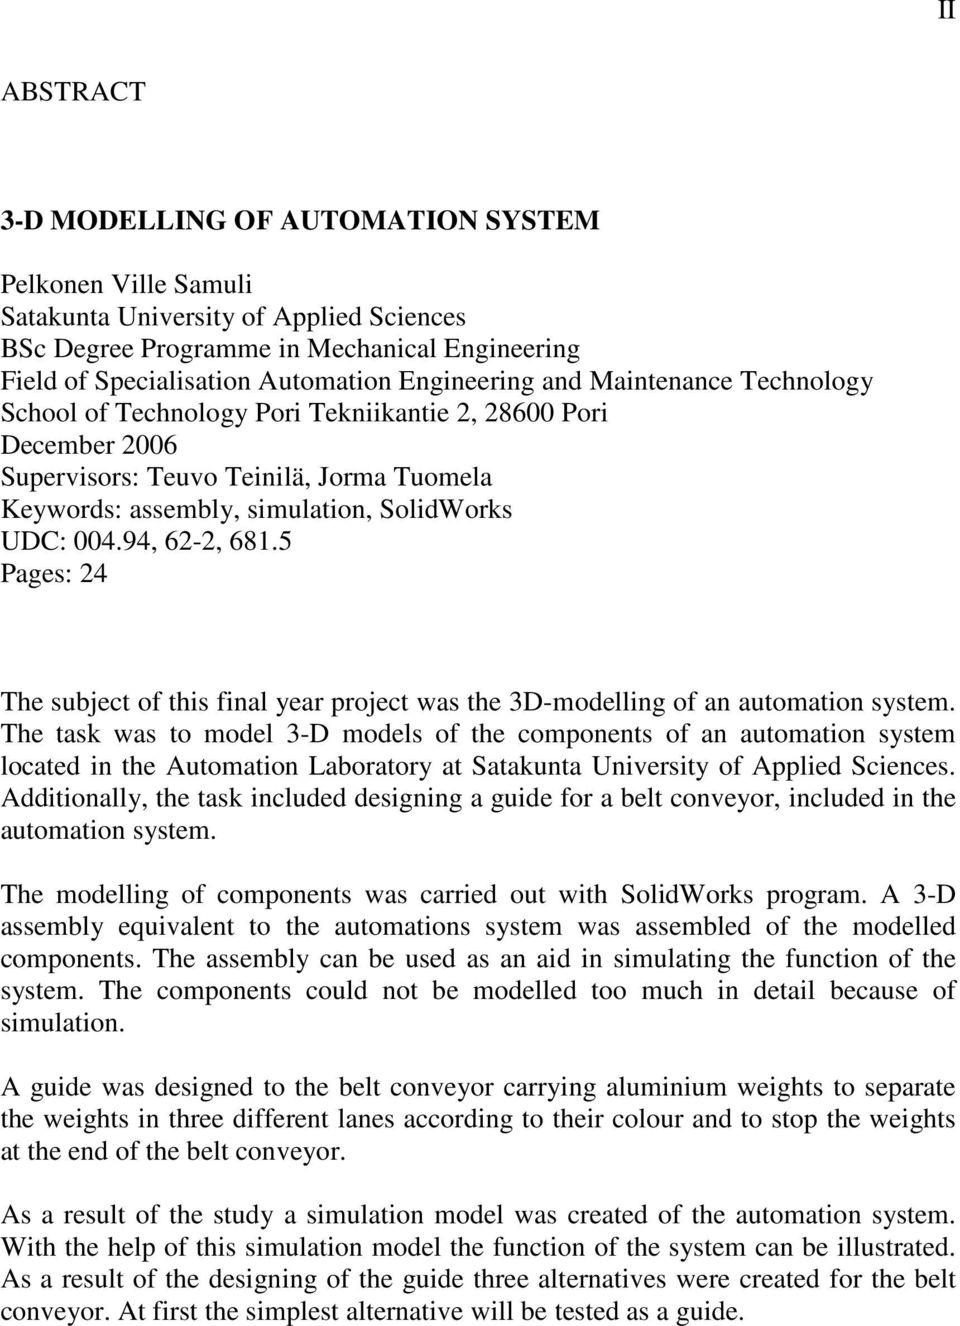 94, 62-2, 681.5 Pages: 24 The subject of this final year project was the 3D-modelling of an automation system.